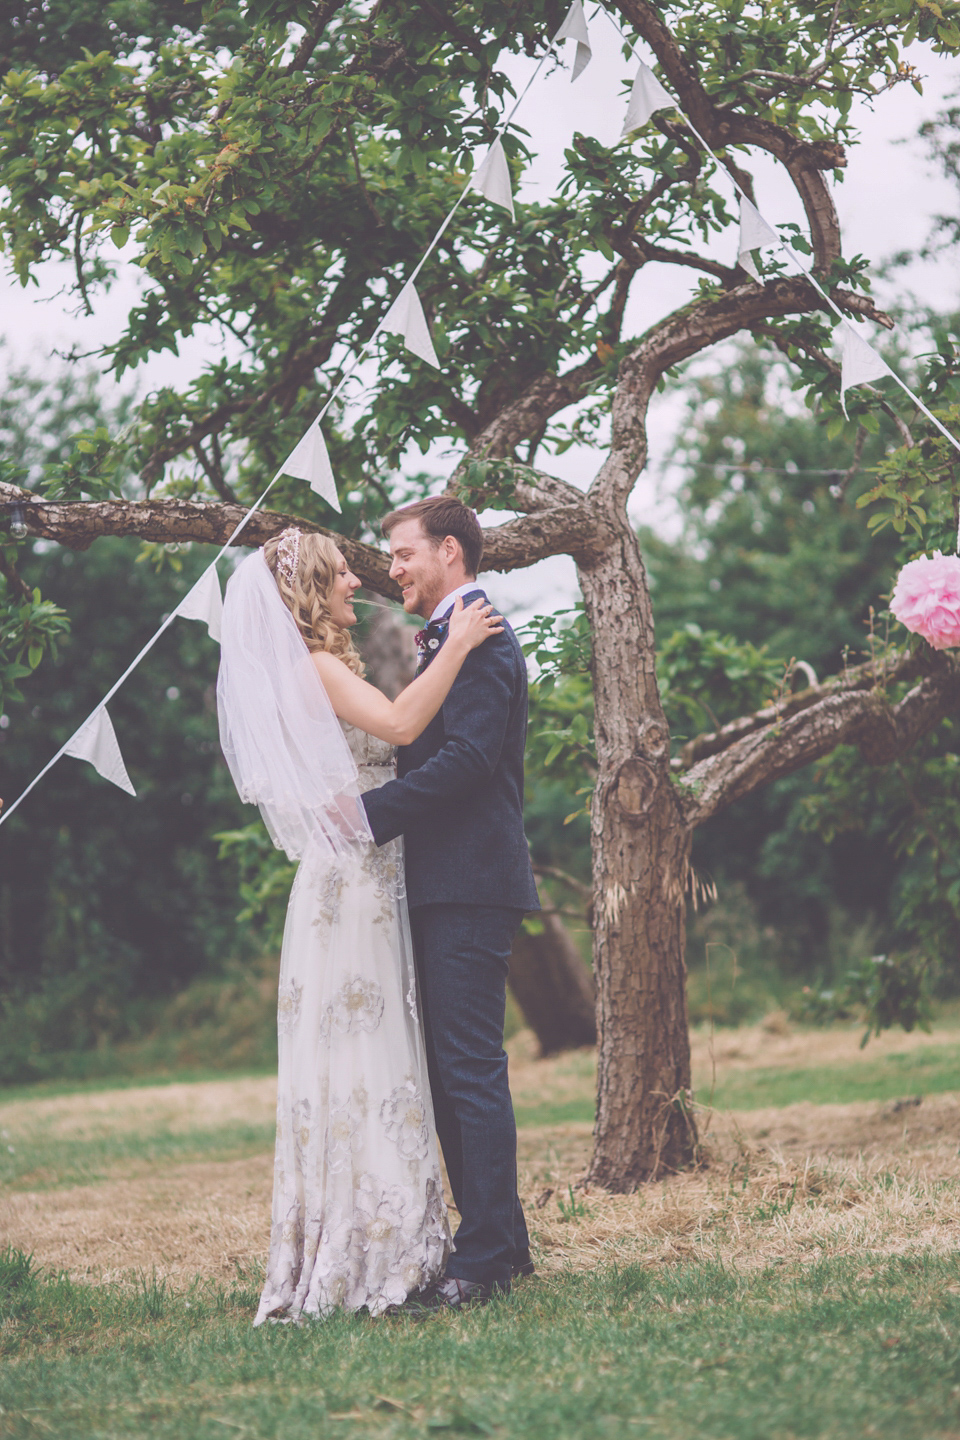 Bride Jo wears a Claire Pettibone gown and vintage tiara for her colourful, homespun and humanist wedding celebration. Photography by Naomi Jane Photography.